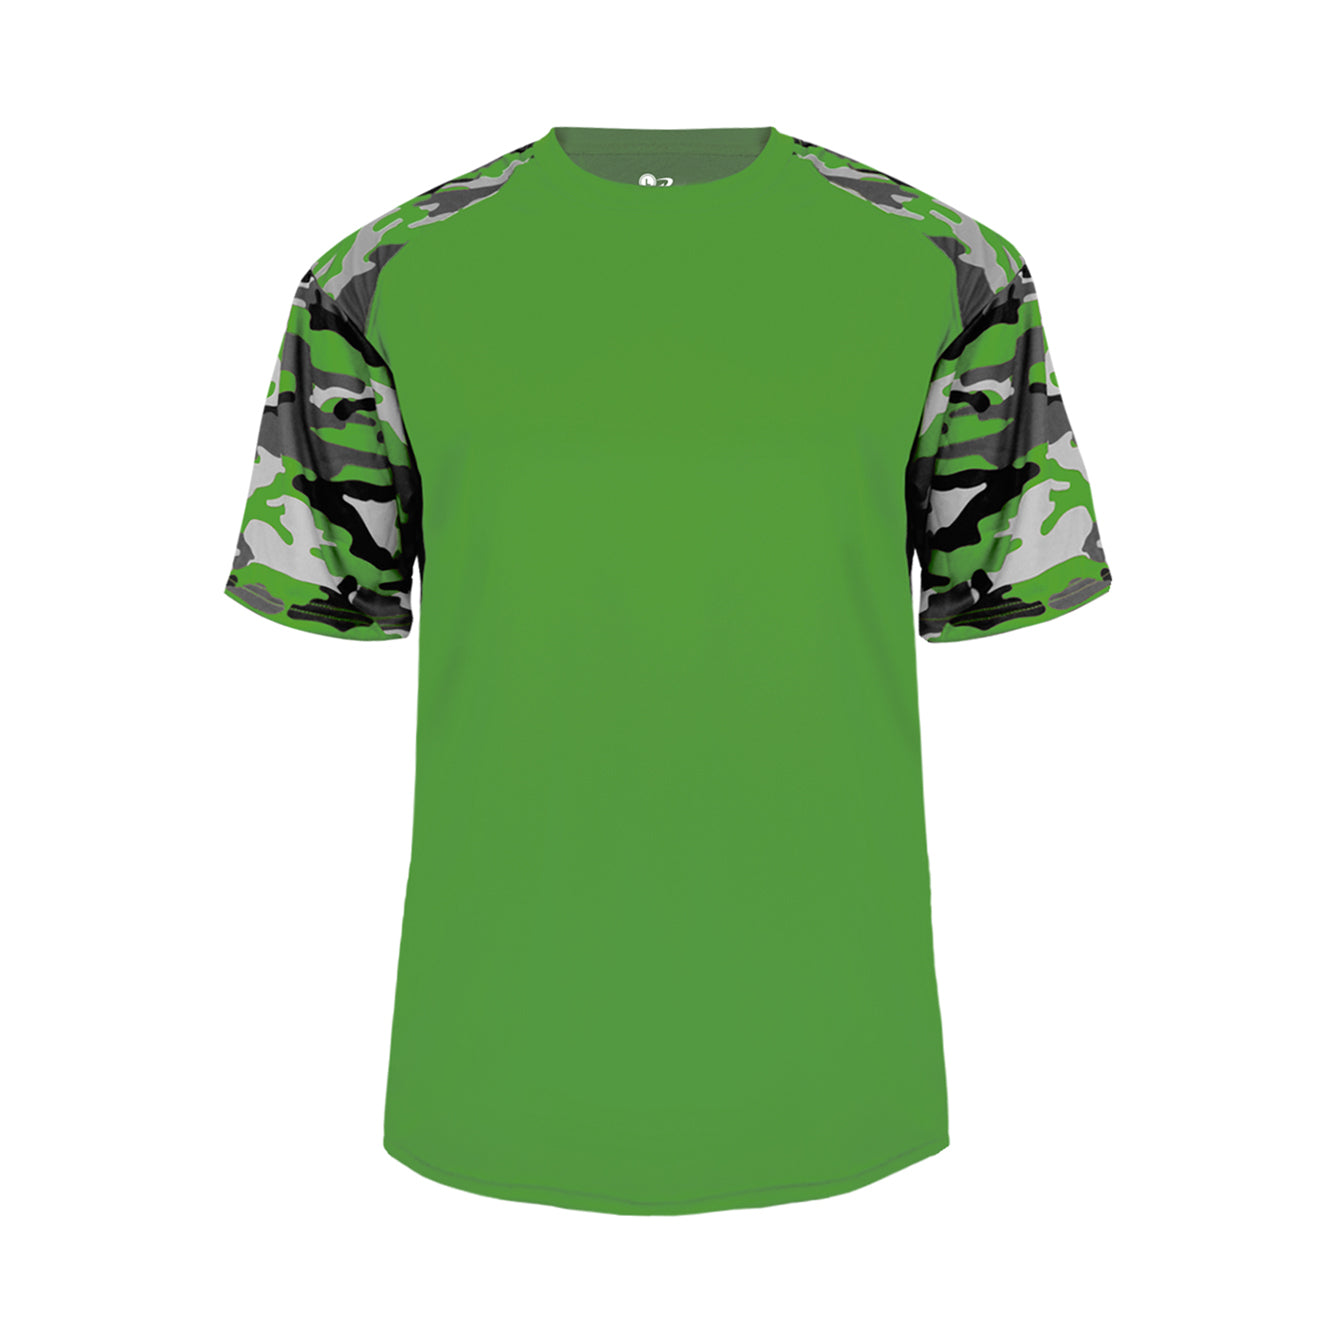 Camo Sport Performance Jersey - Youth